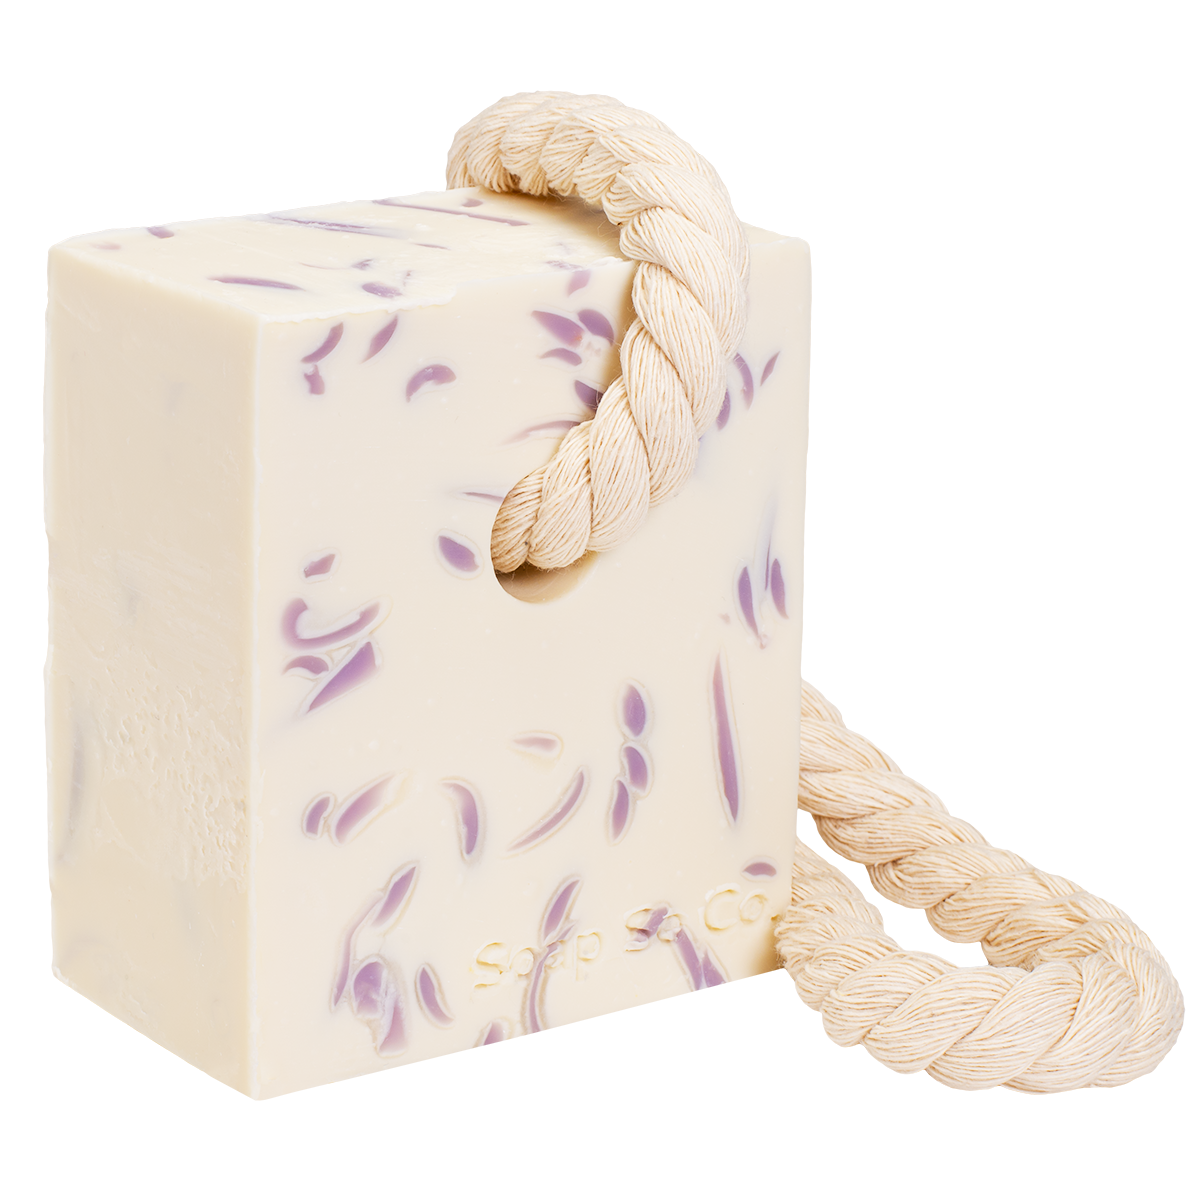 Soap on a Rope